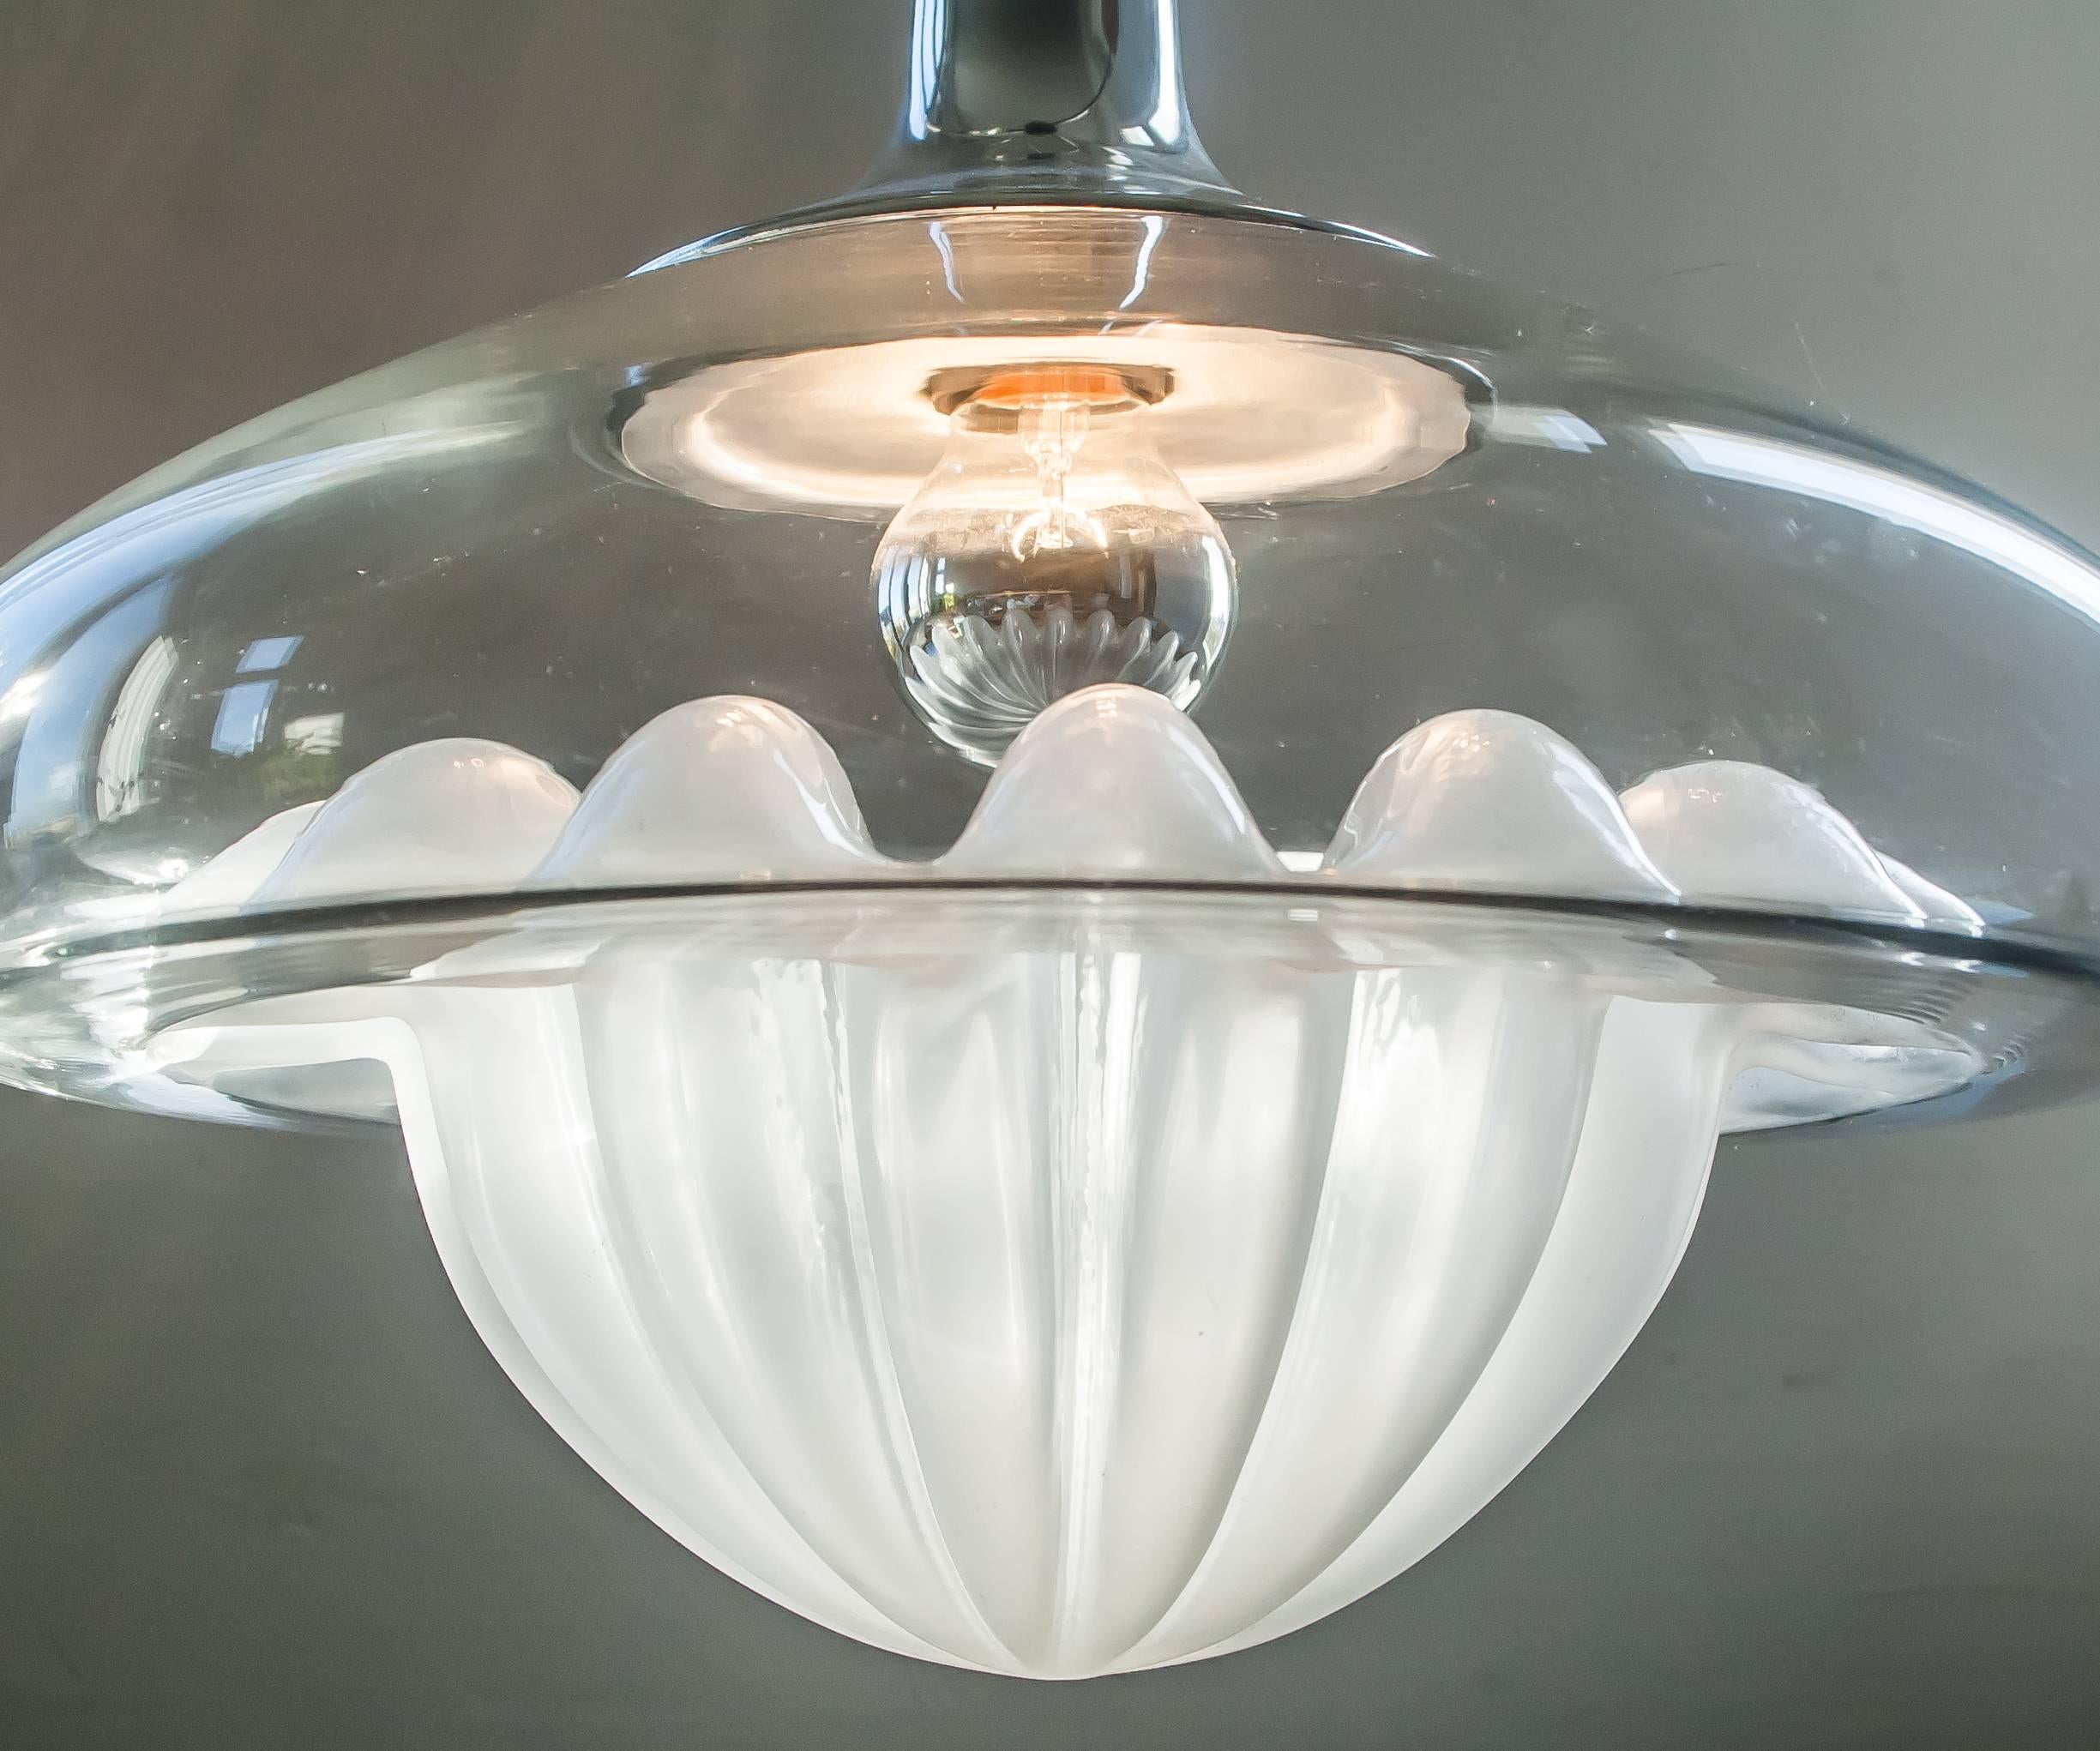 Single stunning mercury satin glass and polished nickel frame pendant light by Peill & Putzler of Germany, called the Lemon Press. Clear glass part has a dripping effect. See pictures. This light is very hard to find and a rare piece for